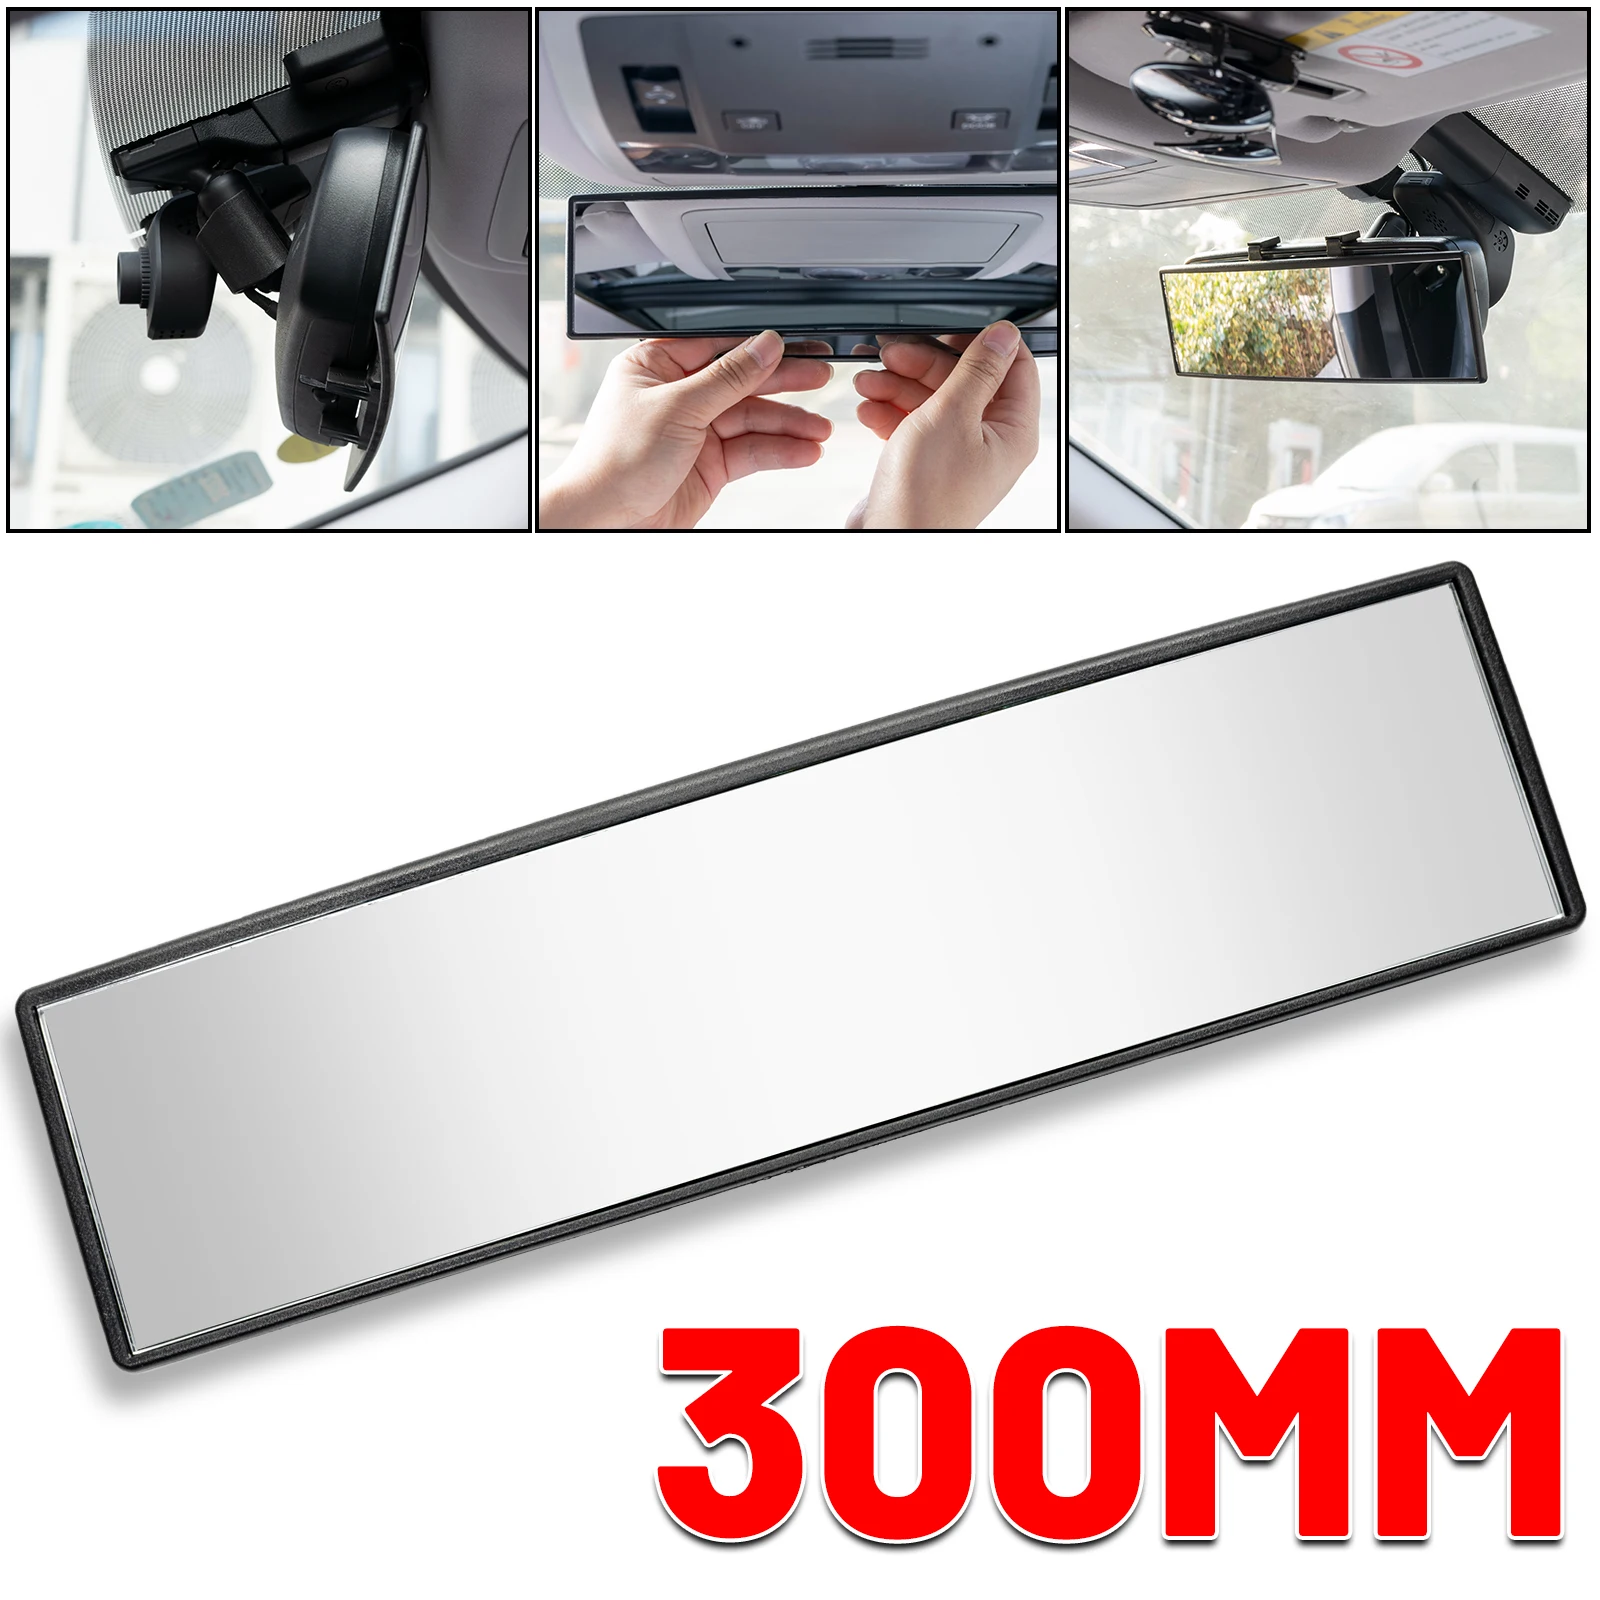 

Universal Car Rear Mirror Wide-angle Rearview Mirror Auto Wide Convex Curve Interior Clip On Rear View Mirror 300mm 270mm